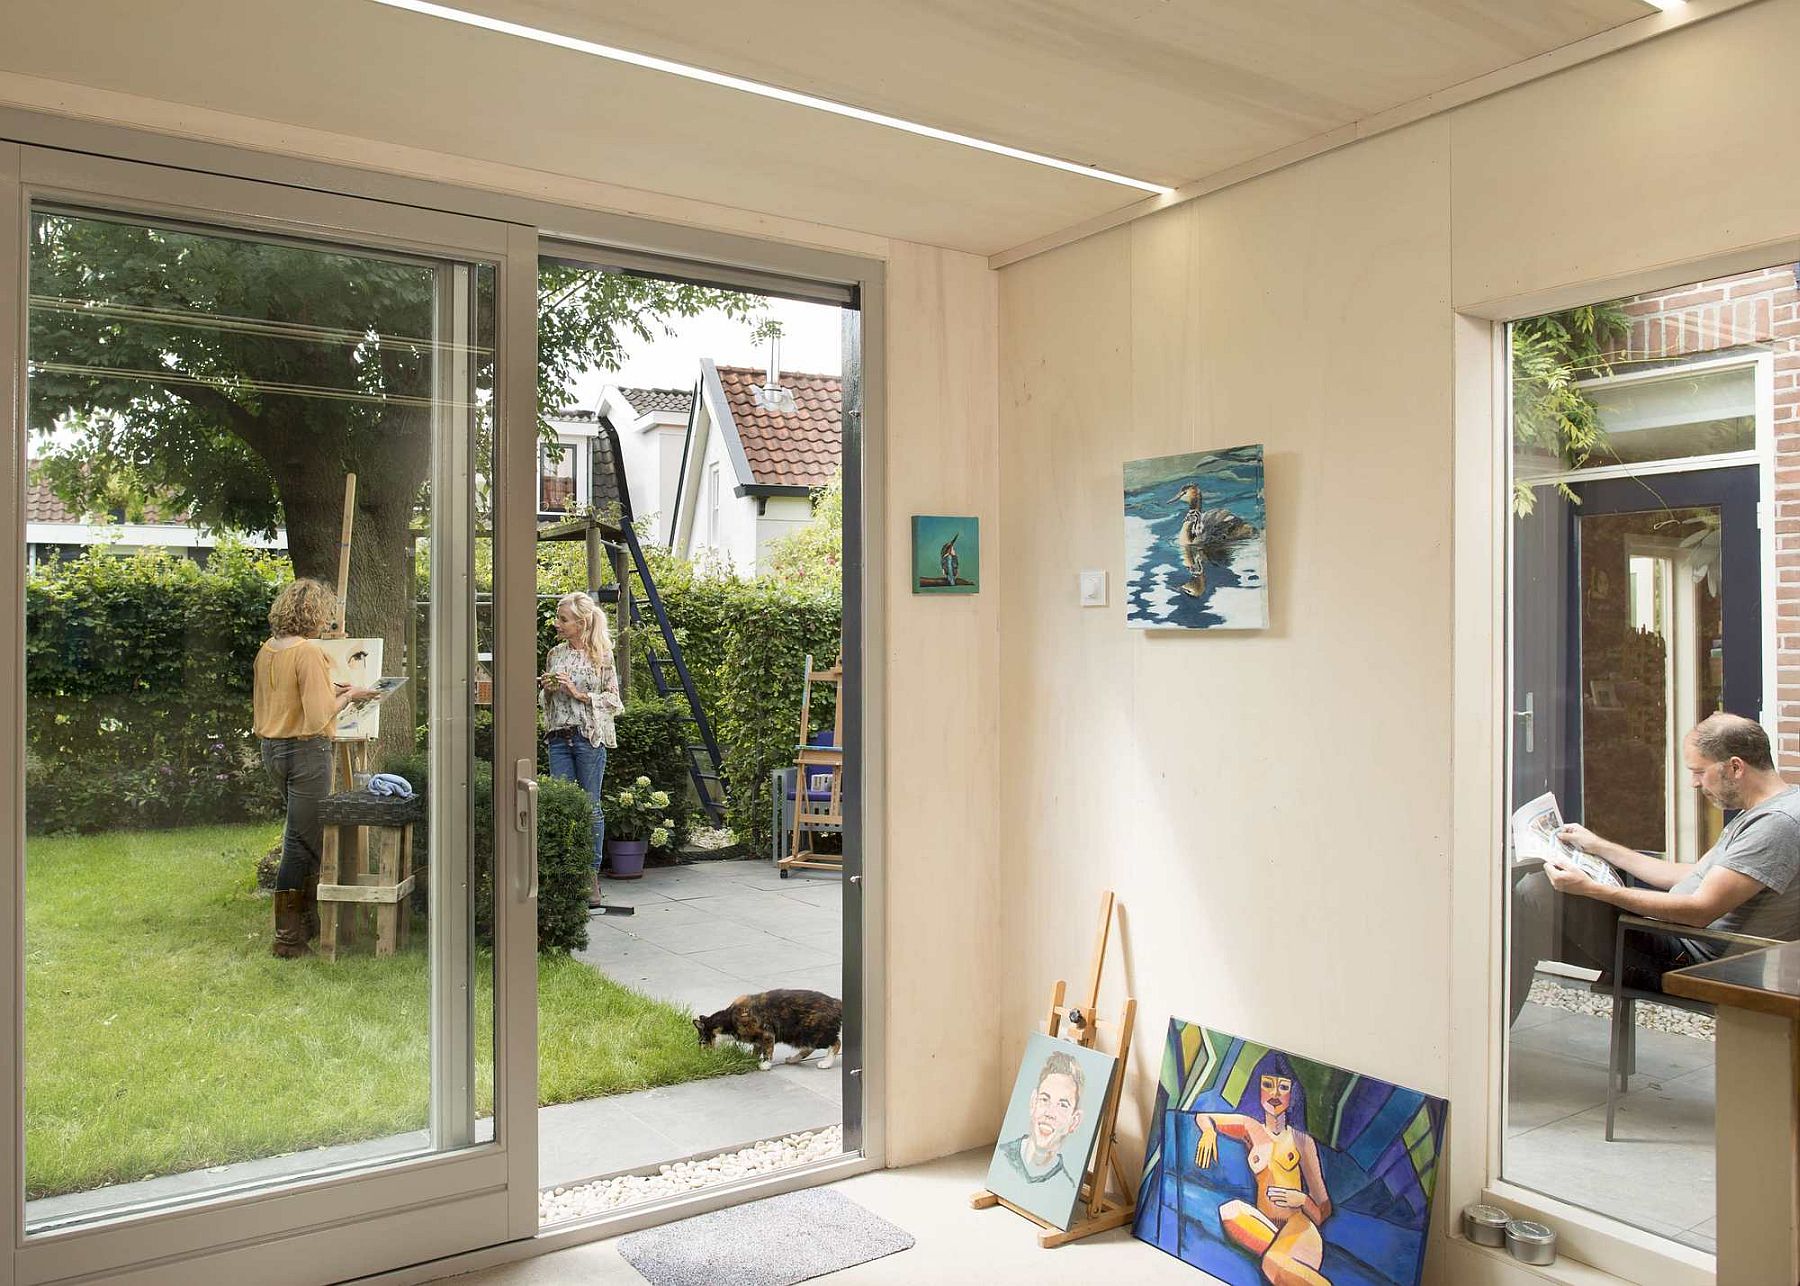 Sliding-glass-doors-connect-the-interior-with-the-garden